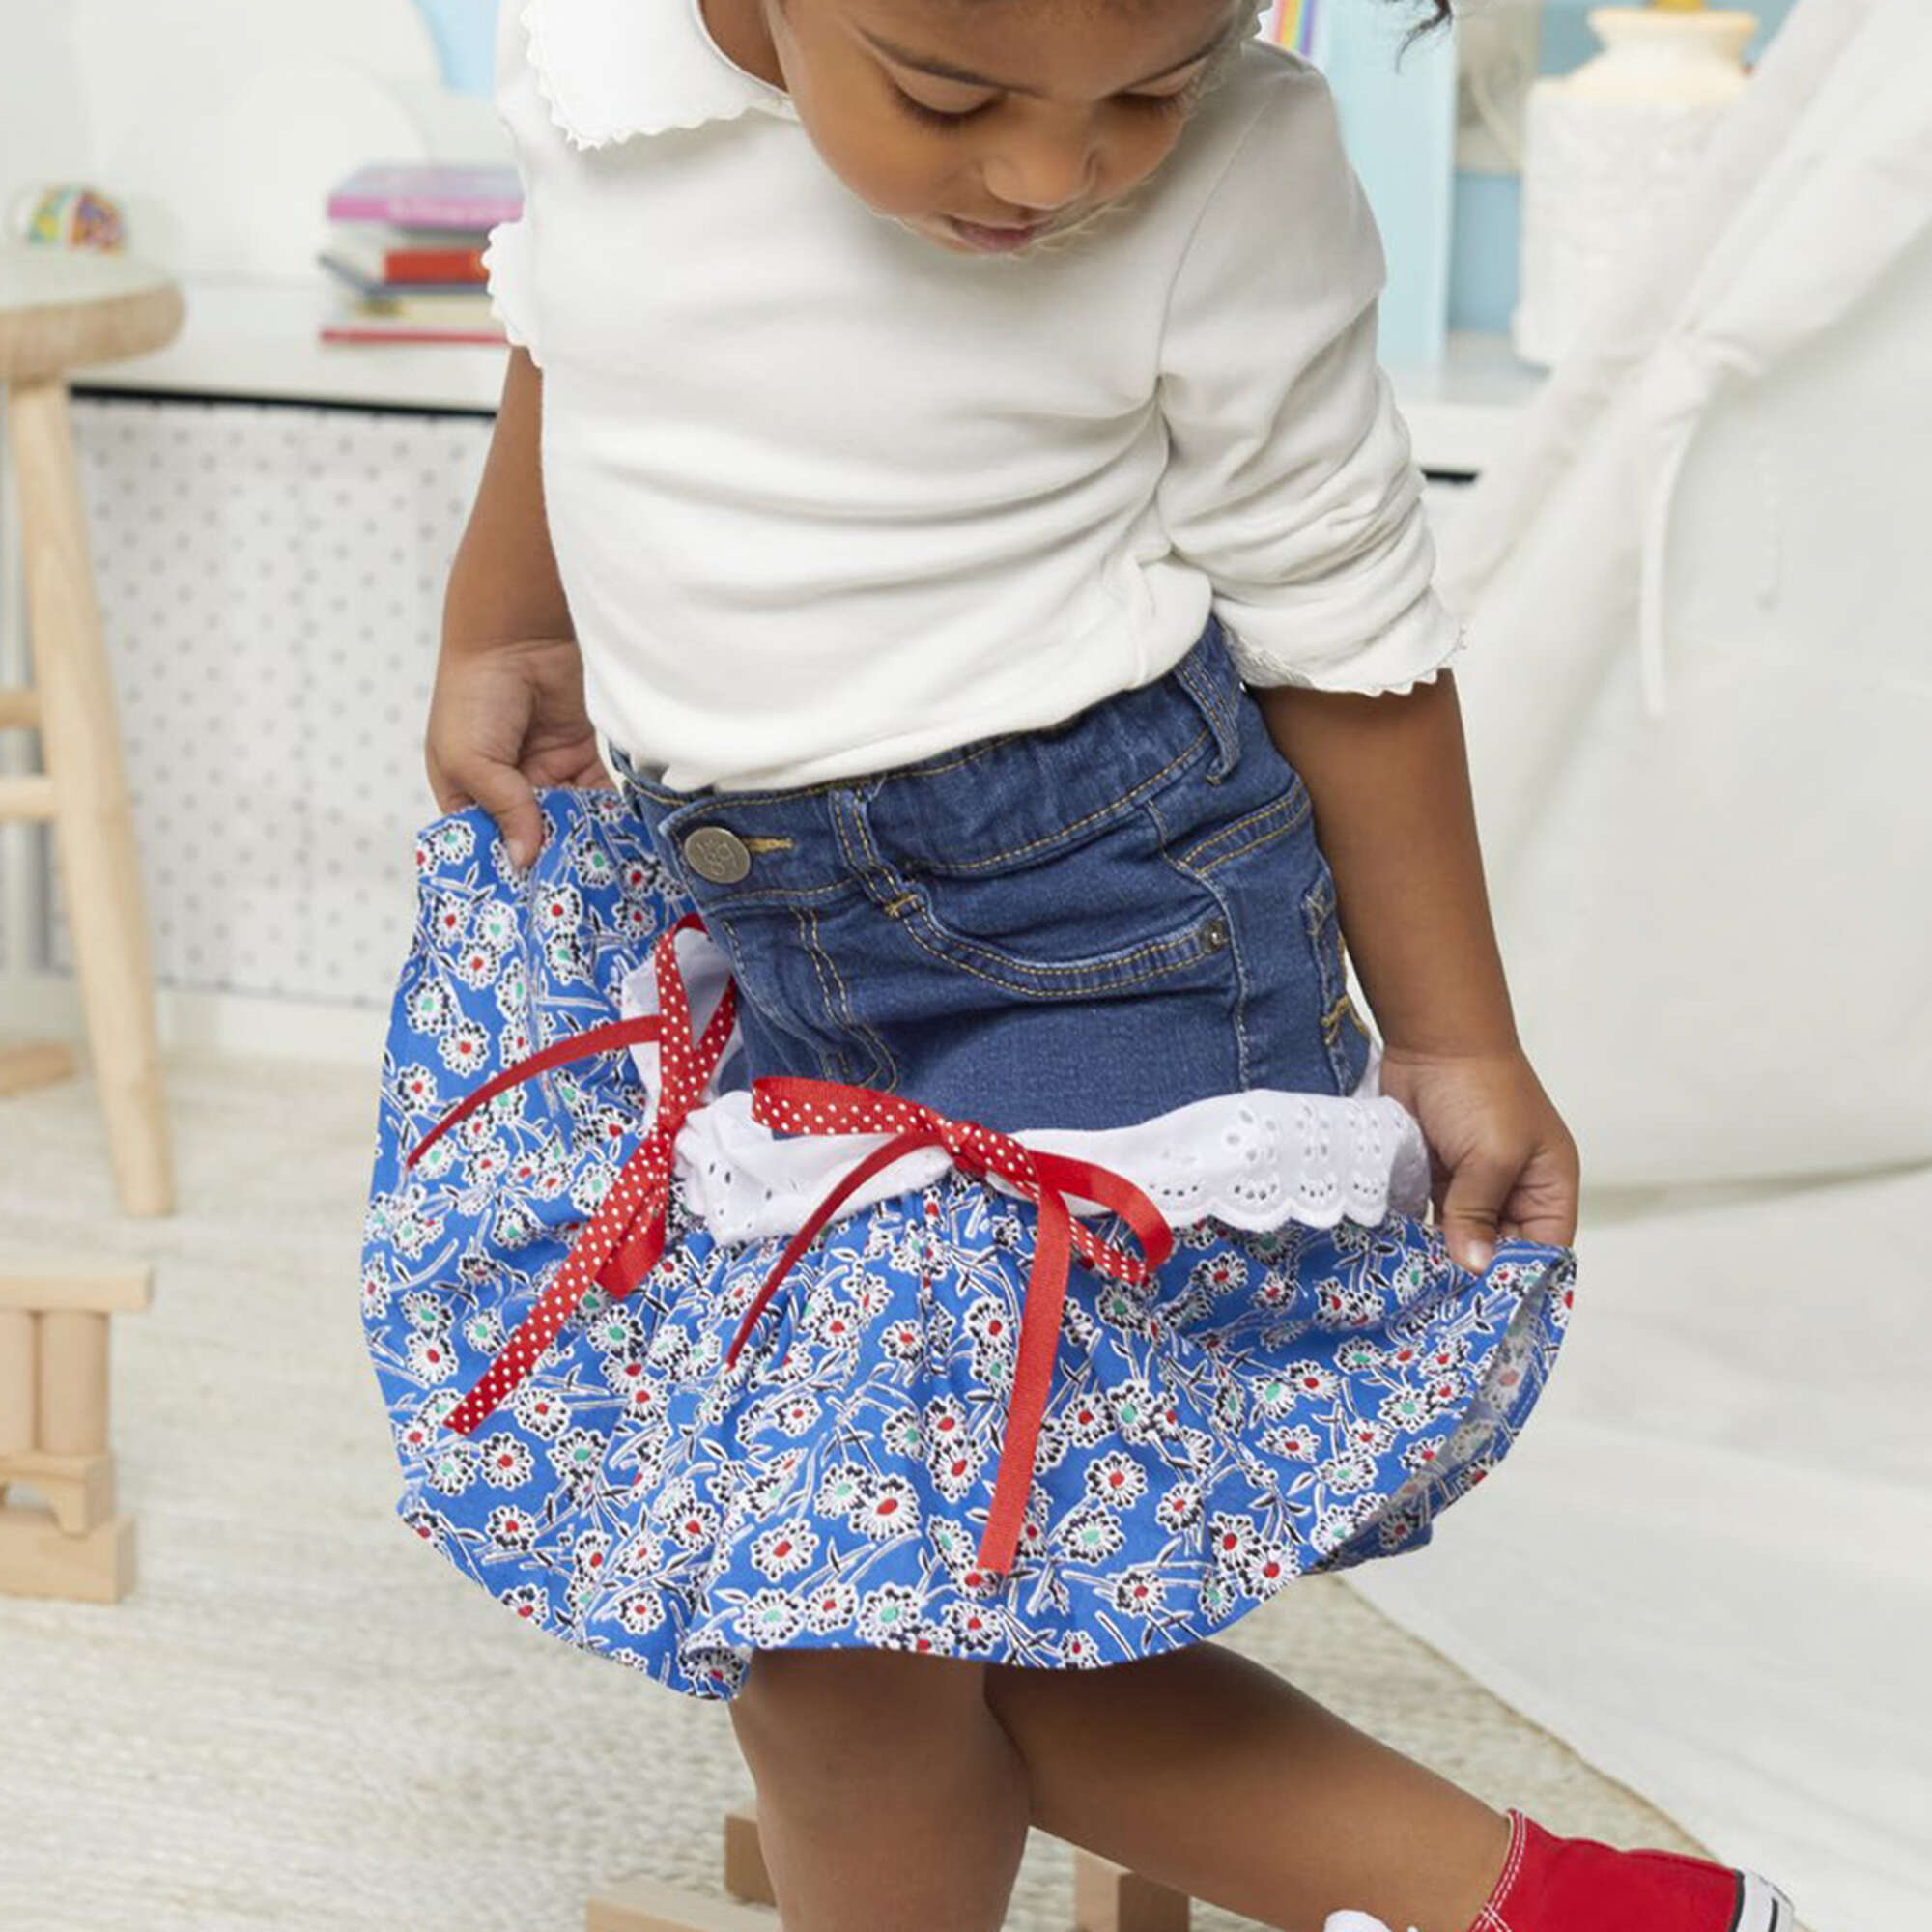 Sew Much To Give: Ruffled Jean Skirt for 